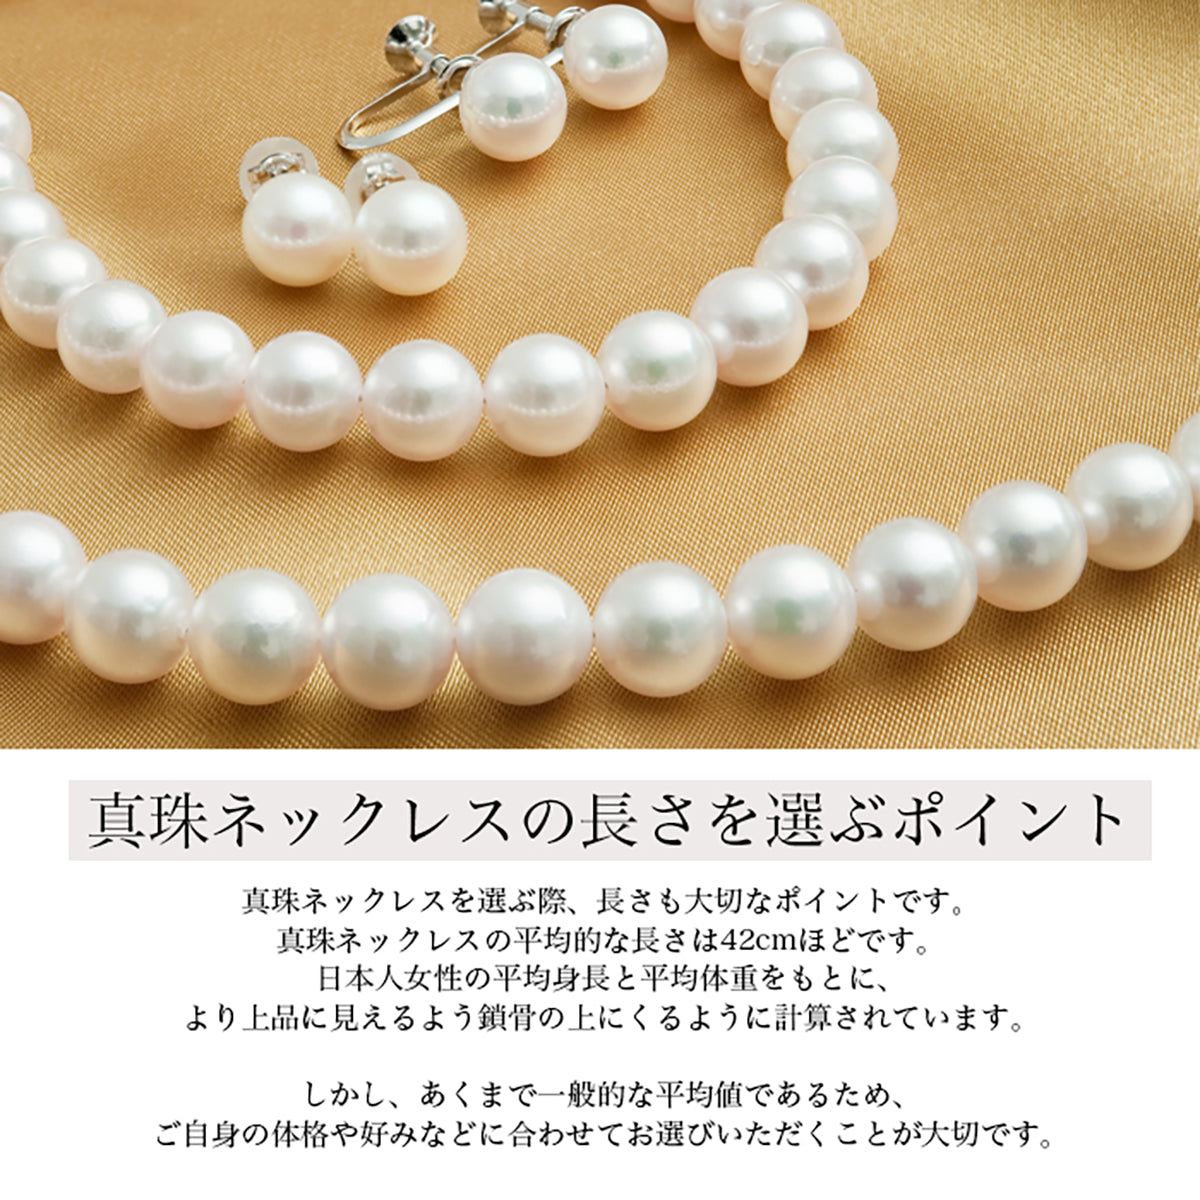 [Hanadama Certified Pearls] Formal Necklace Set of 2 [7.5-8.0mm] (Earrings included) Akoya Pearls with storage case [New Japan Pearl Research Institute Certificate of Authenticity]